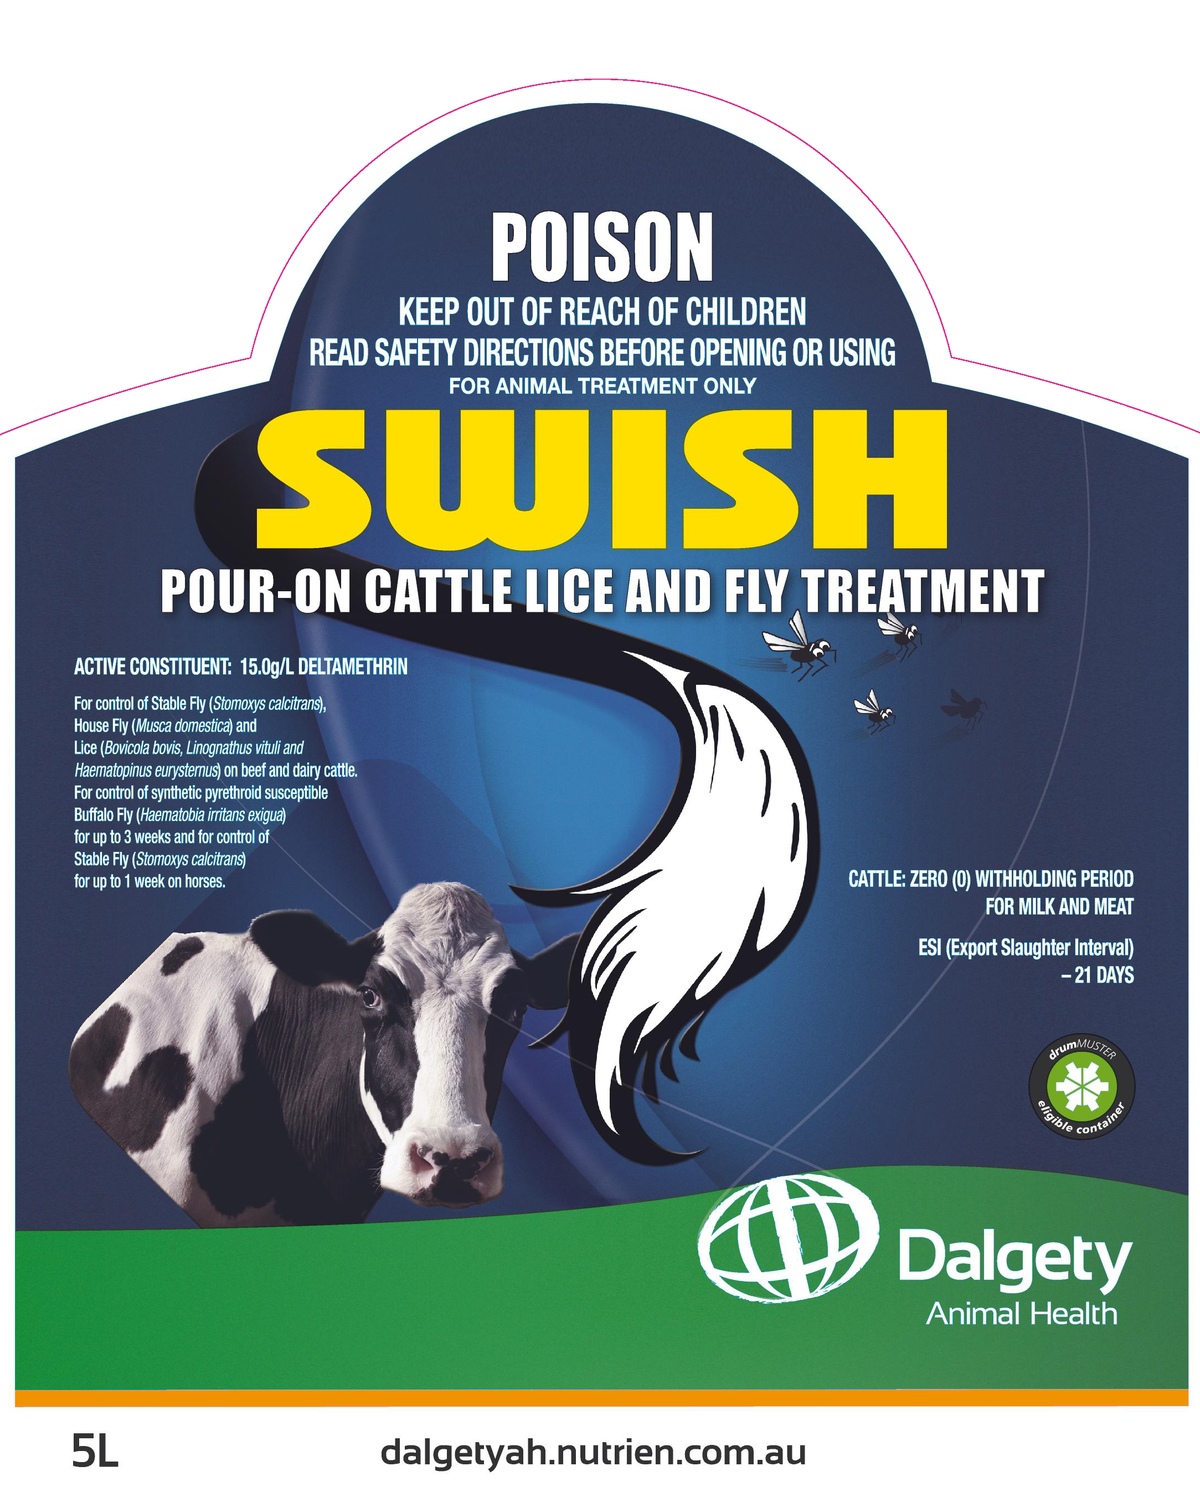 Swish Pour-On Cattle Lice and Fly Treatment Dalgety Animal Health